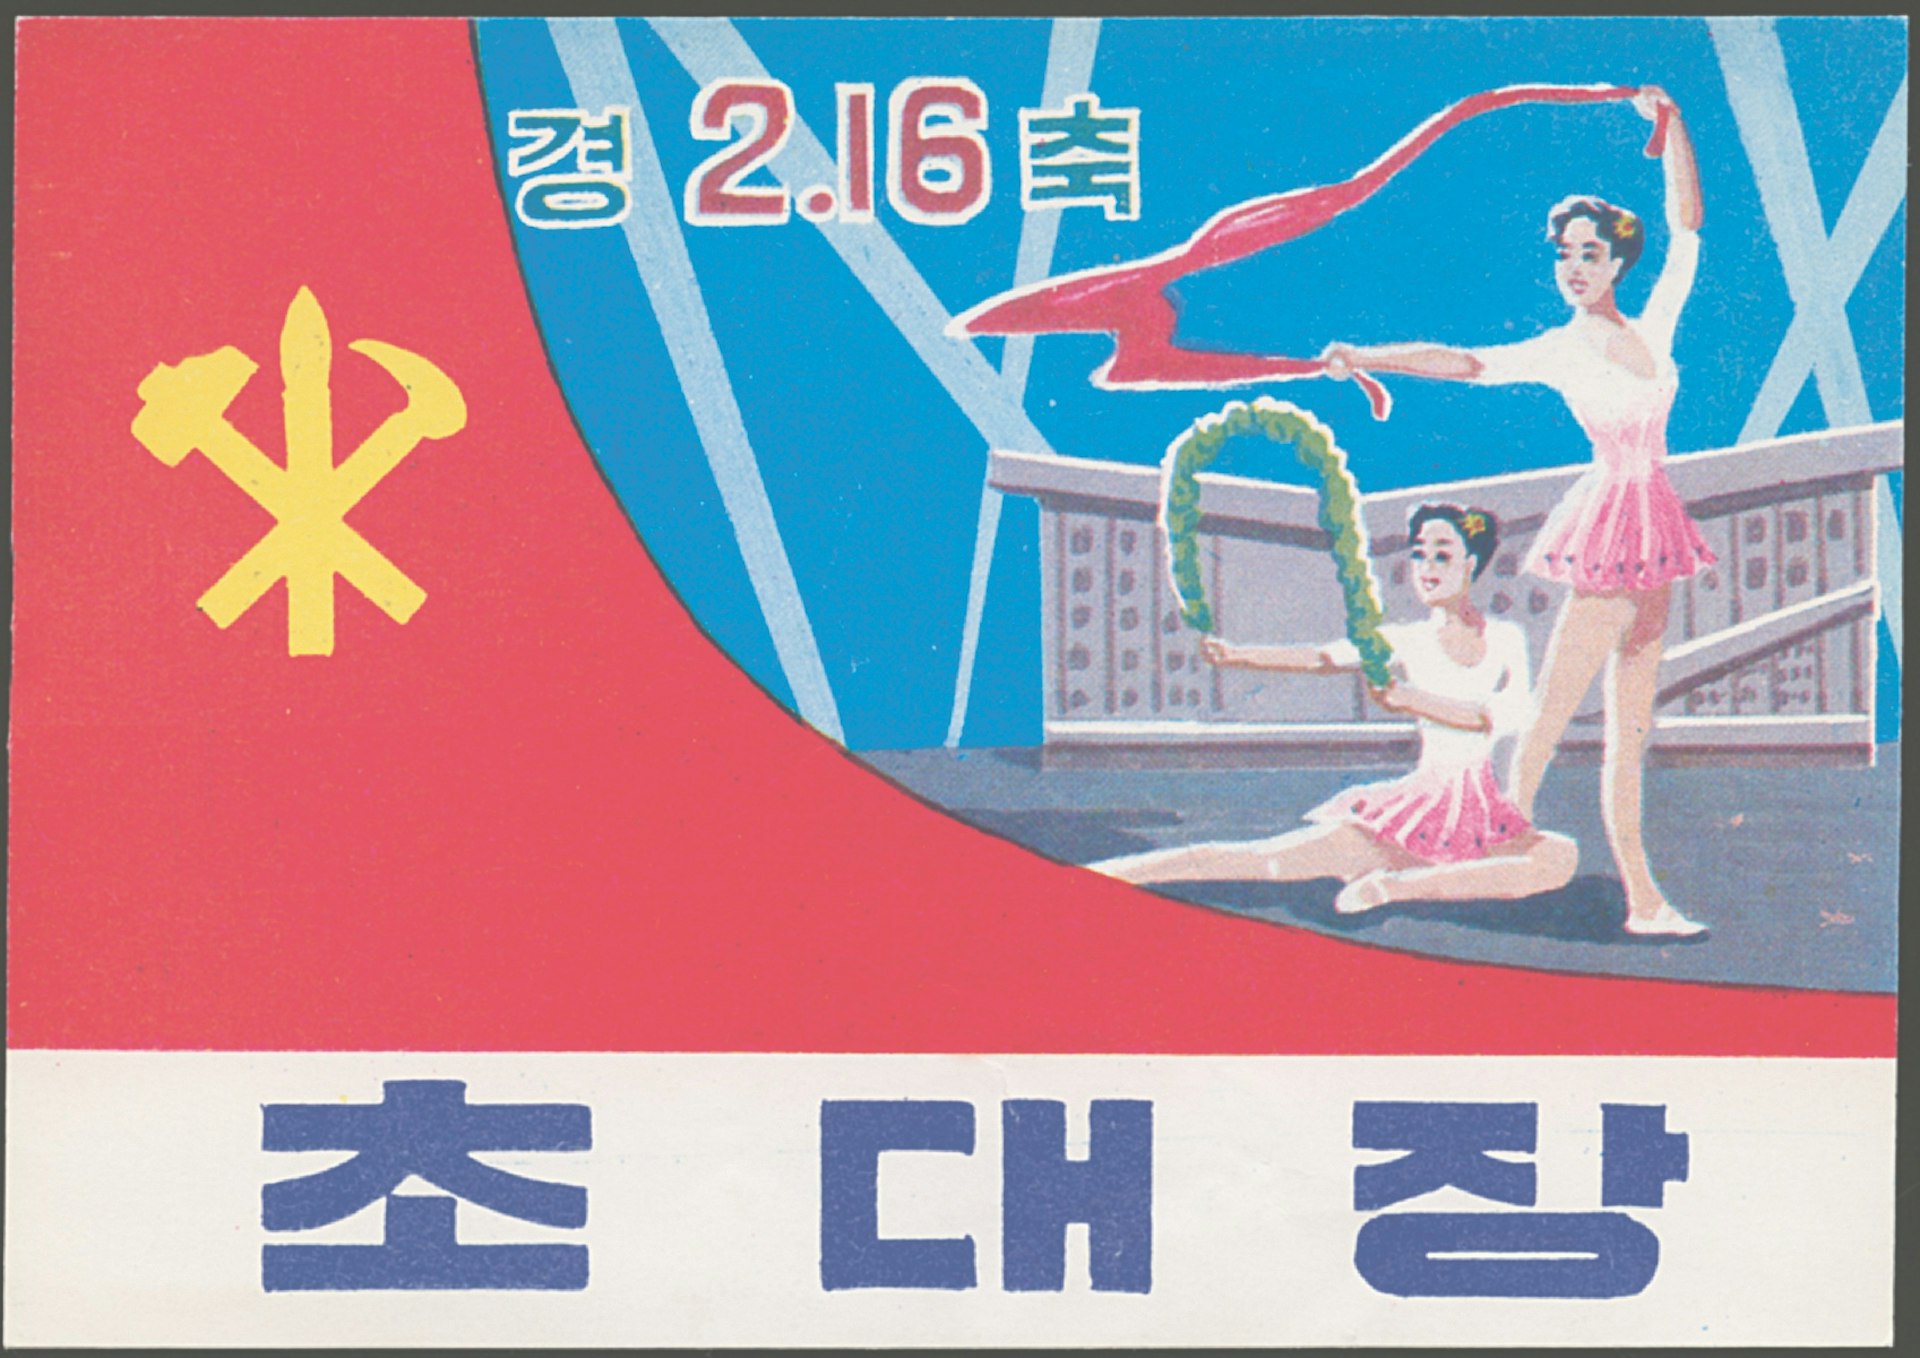 Ticket for the 1996 Mass Games entitled ‘Down with Imperialism Union’ – an organisation established by Kim Il Sung in 1926 and considered to be the precursor of the Worker’s Party, the ruling party since 1945